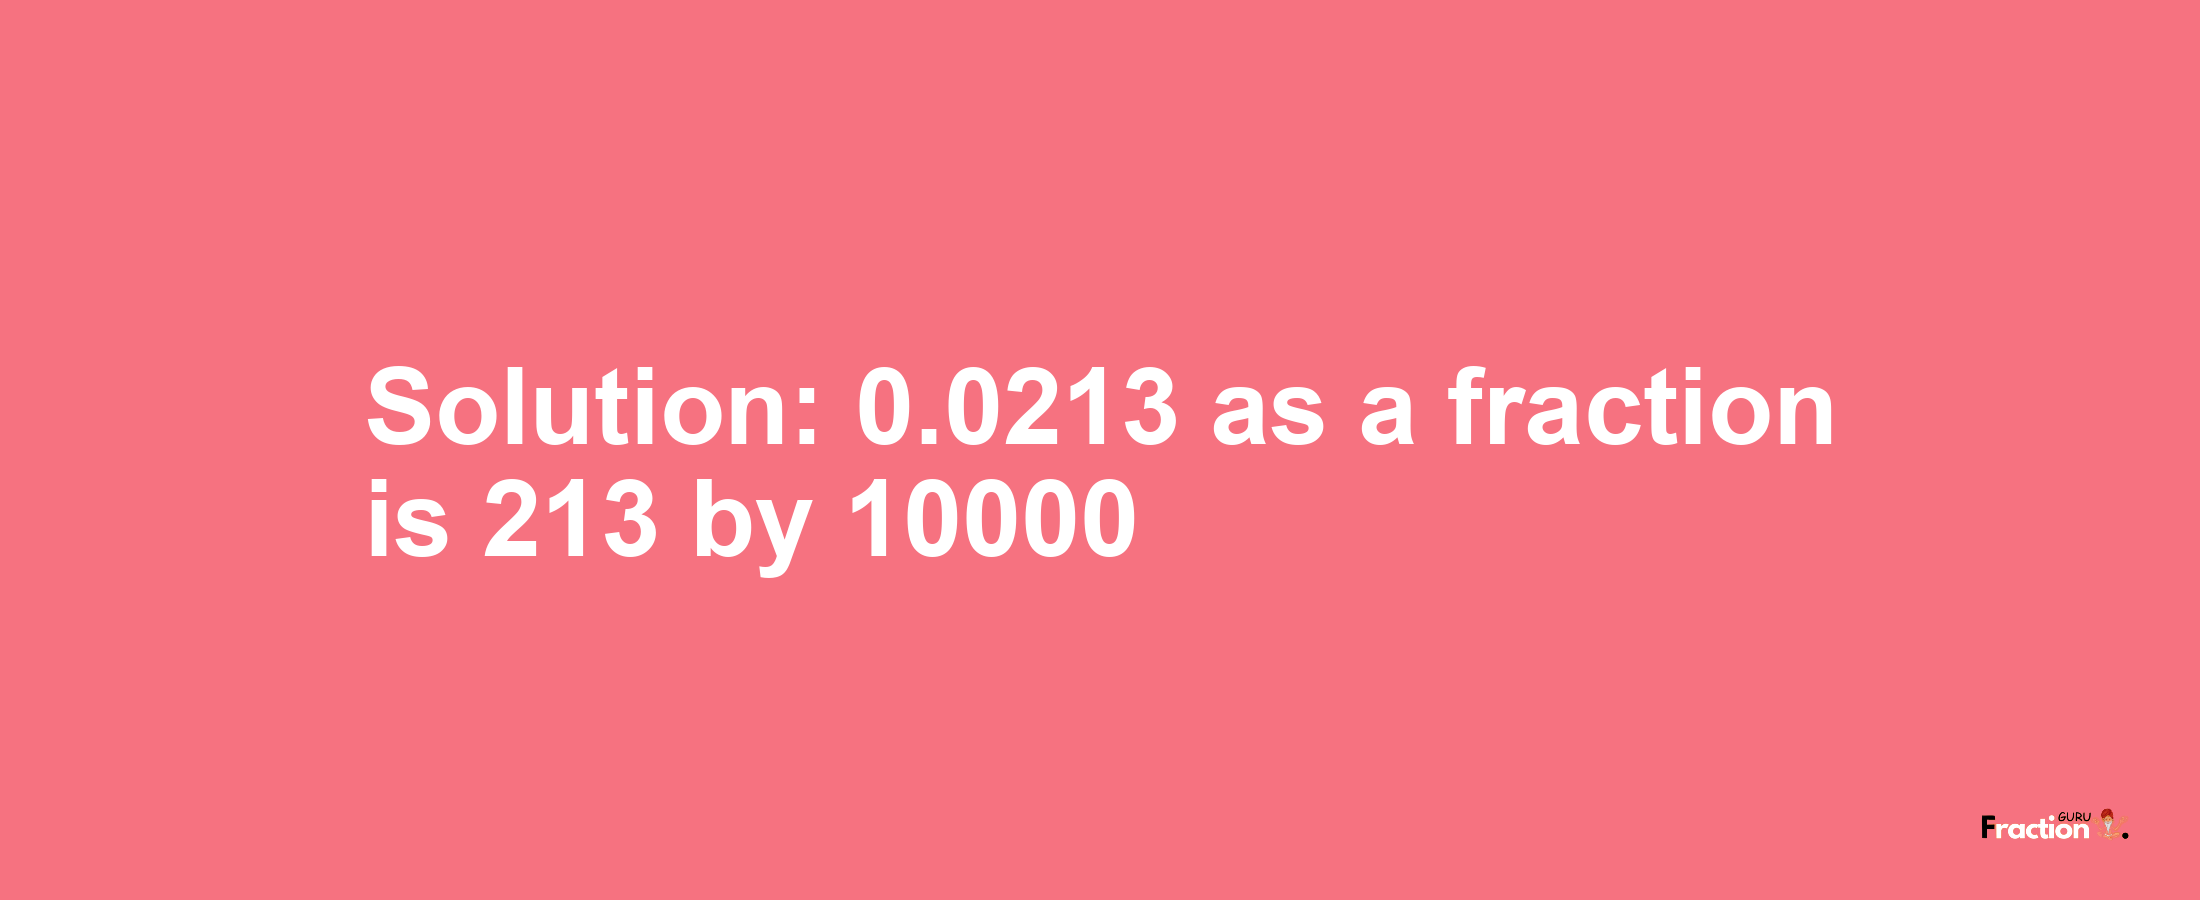 Solution:0.0213 as a fraction is 213/10000